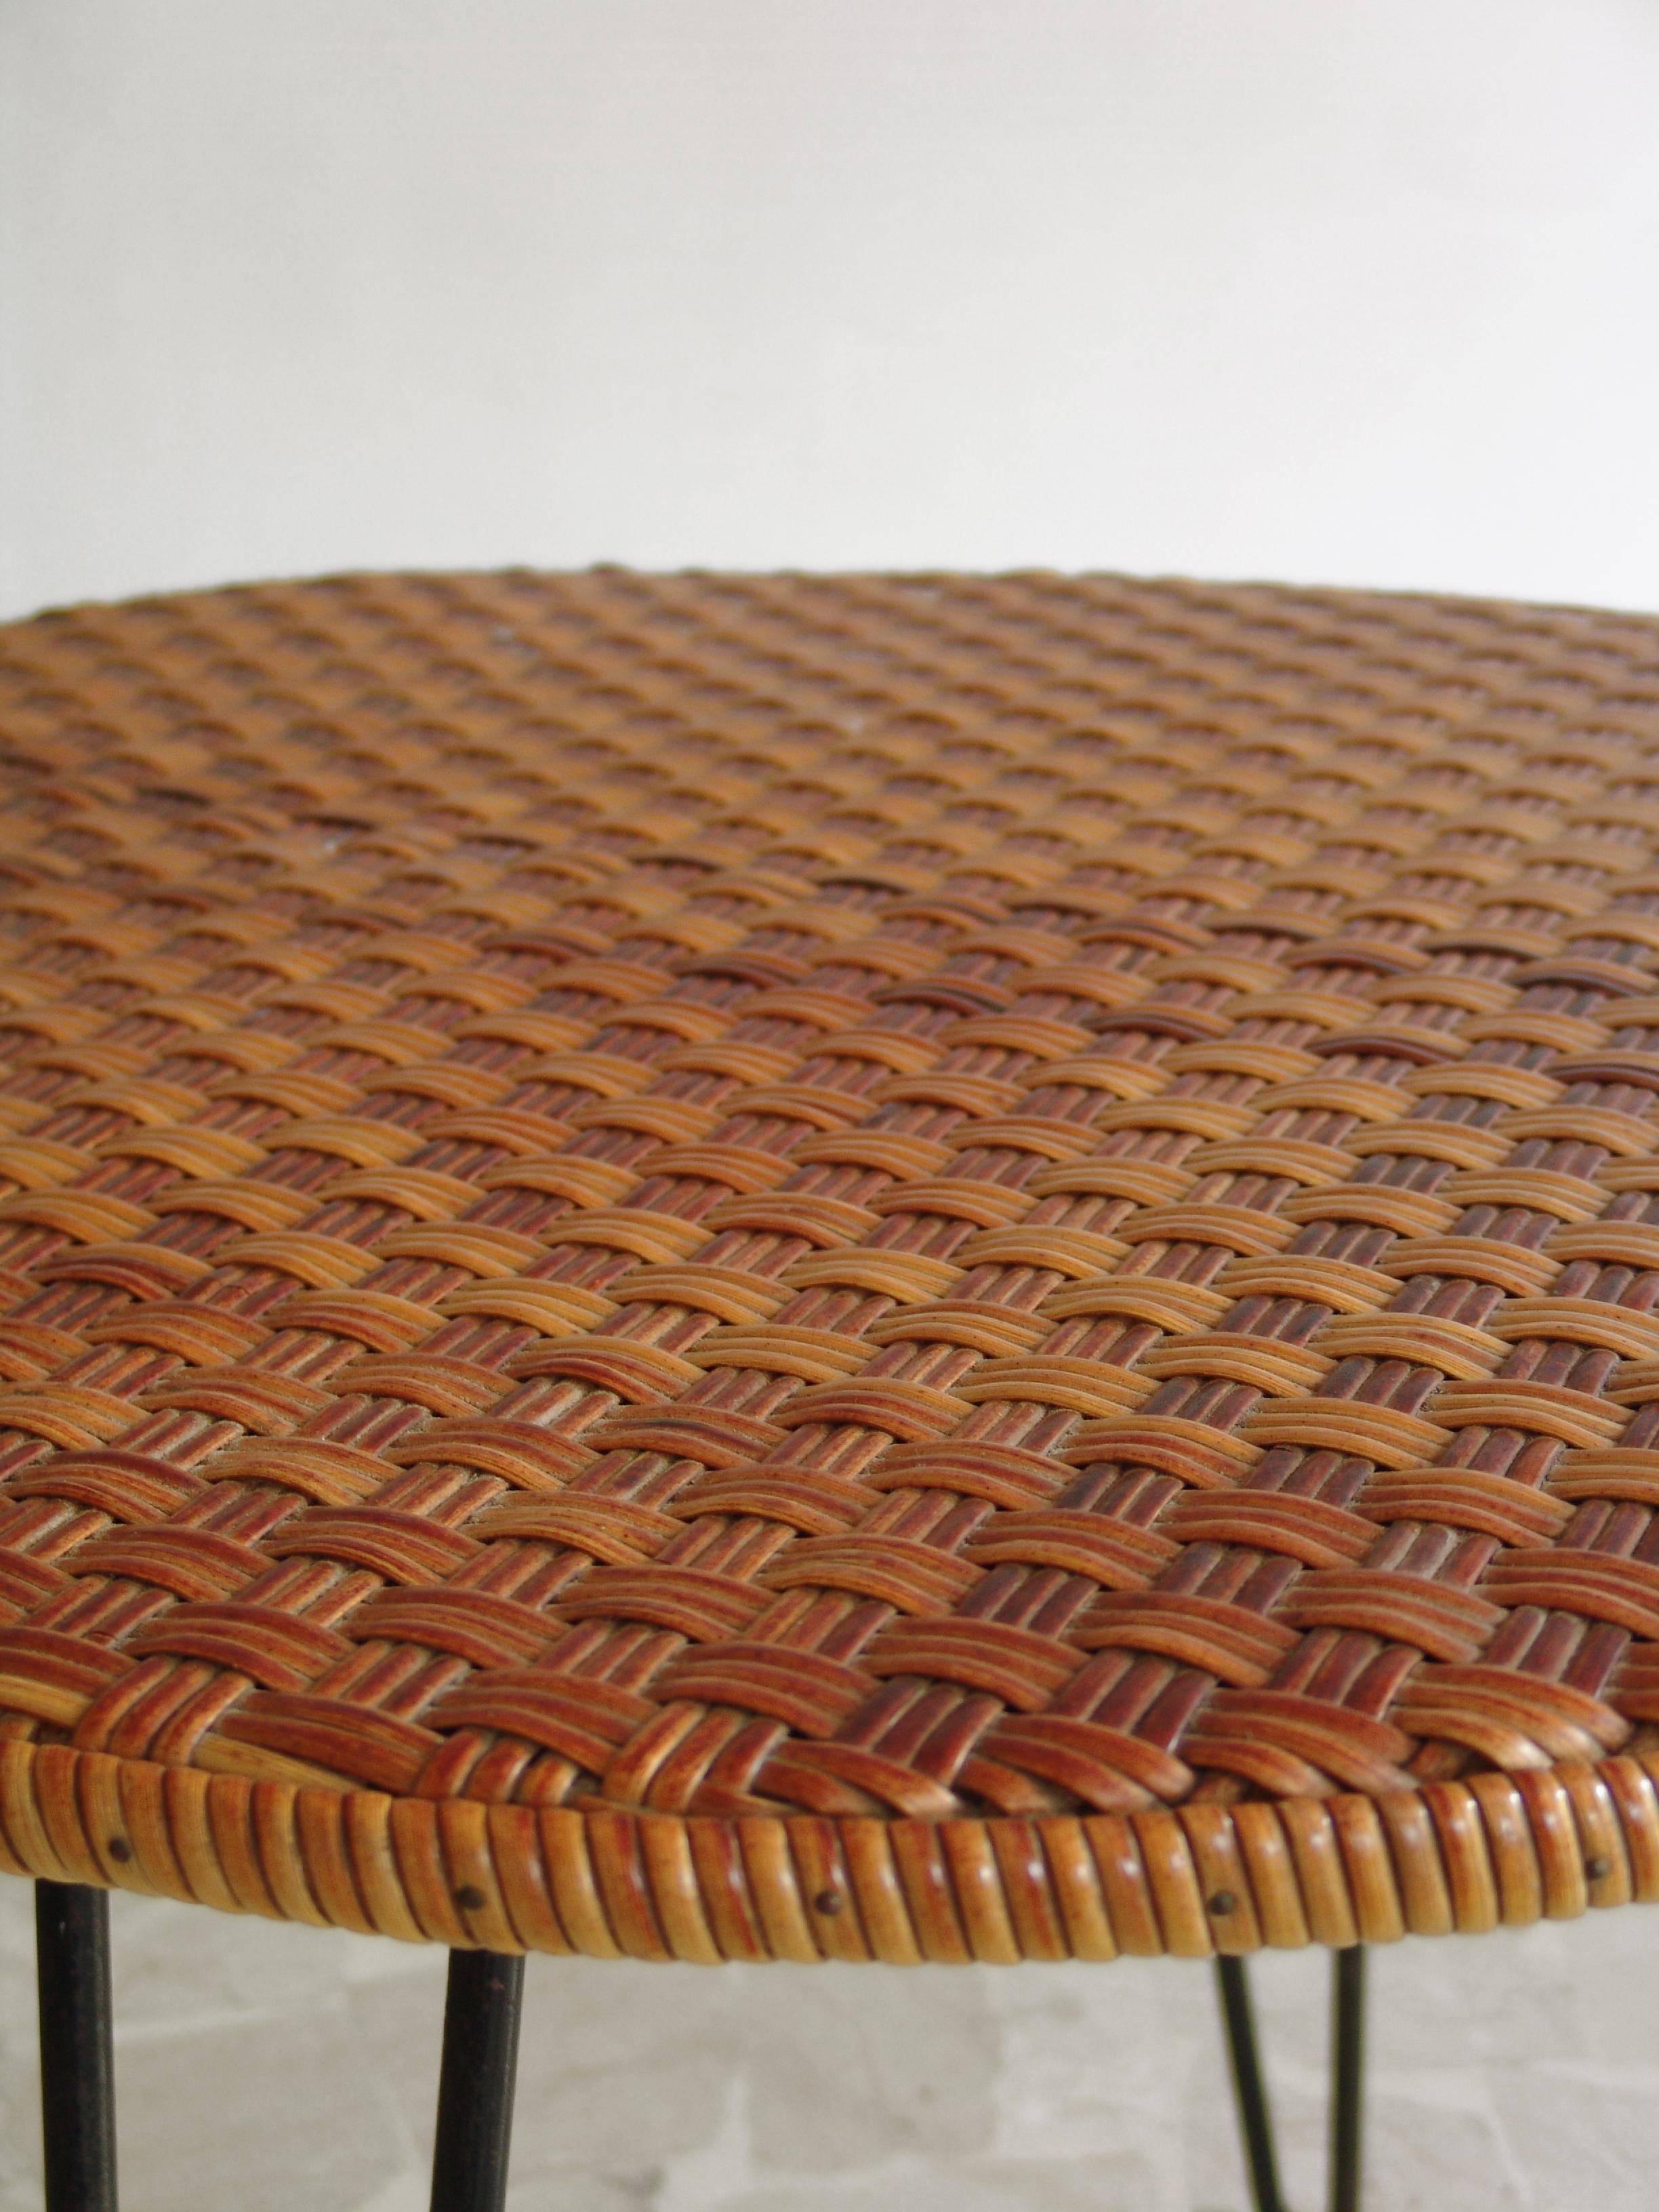 Painted 1950s Wicker Italian Mid-Century Modern Dining or Garden Table For Sale